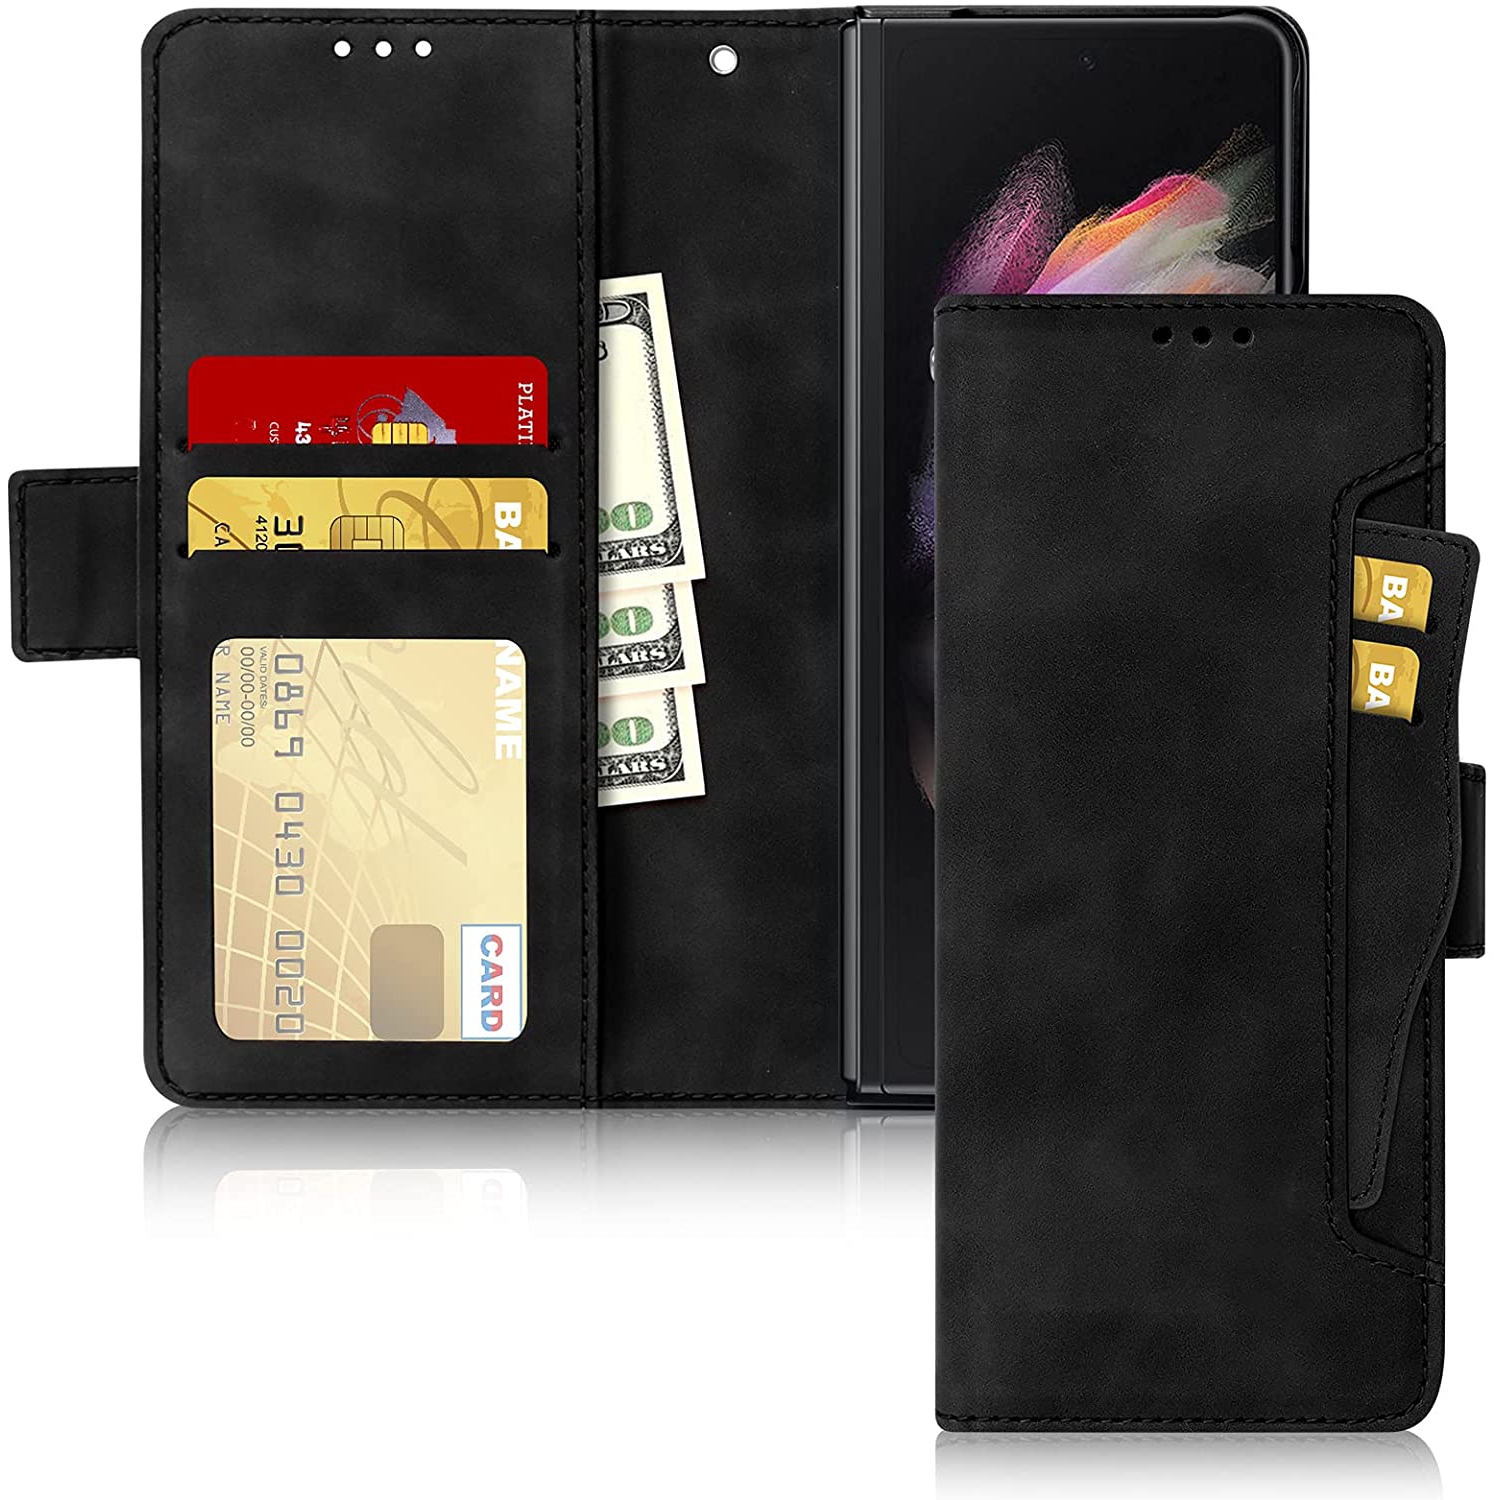 [CS] Samsung Galaxy Z Fold 4 5G 2022 Case, Magnetic Leather Folio Wallet Flip Case Cover with Card Slot, Black